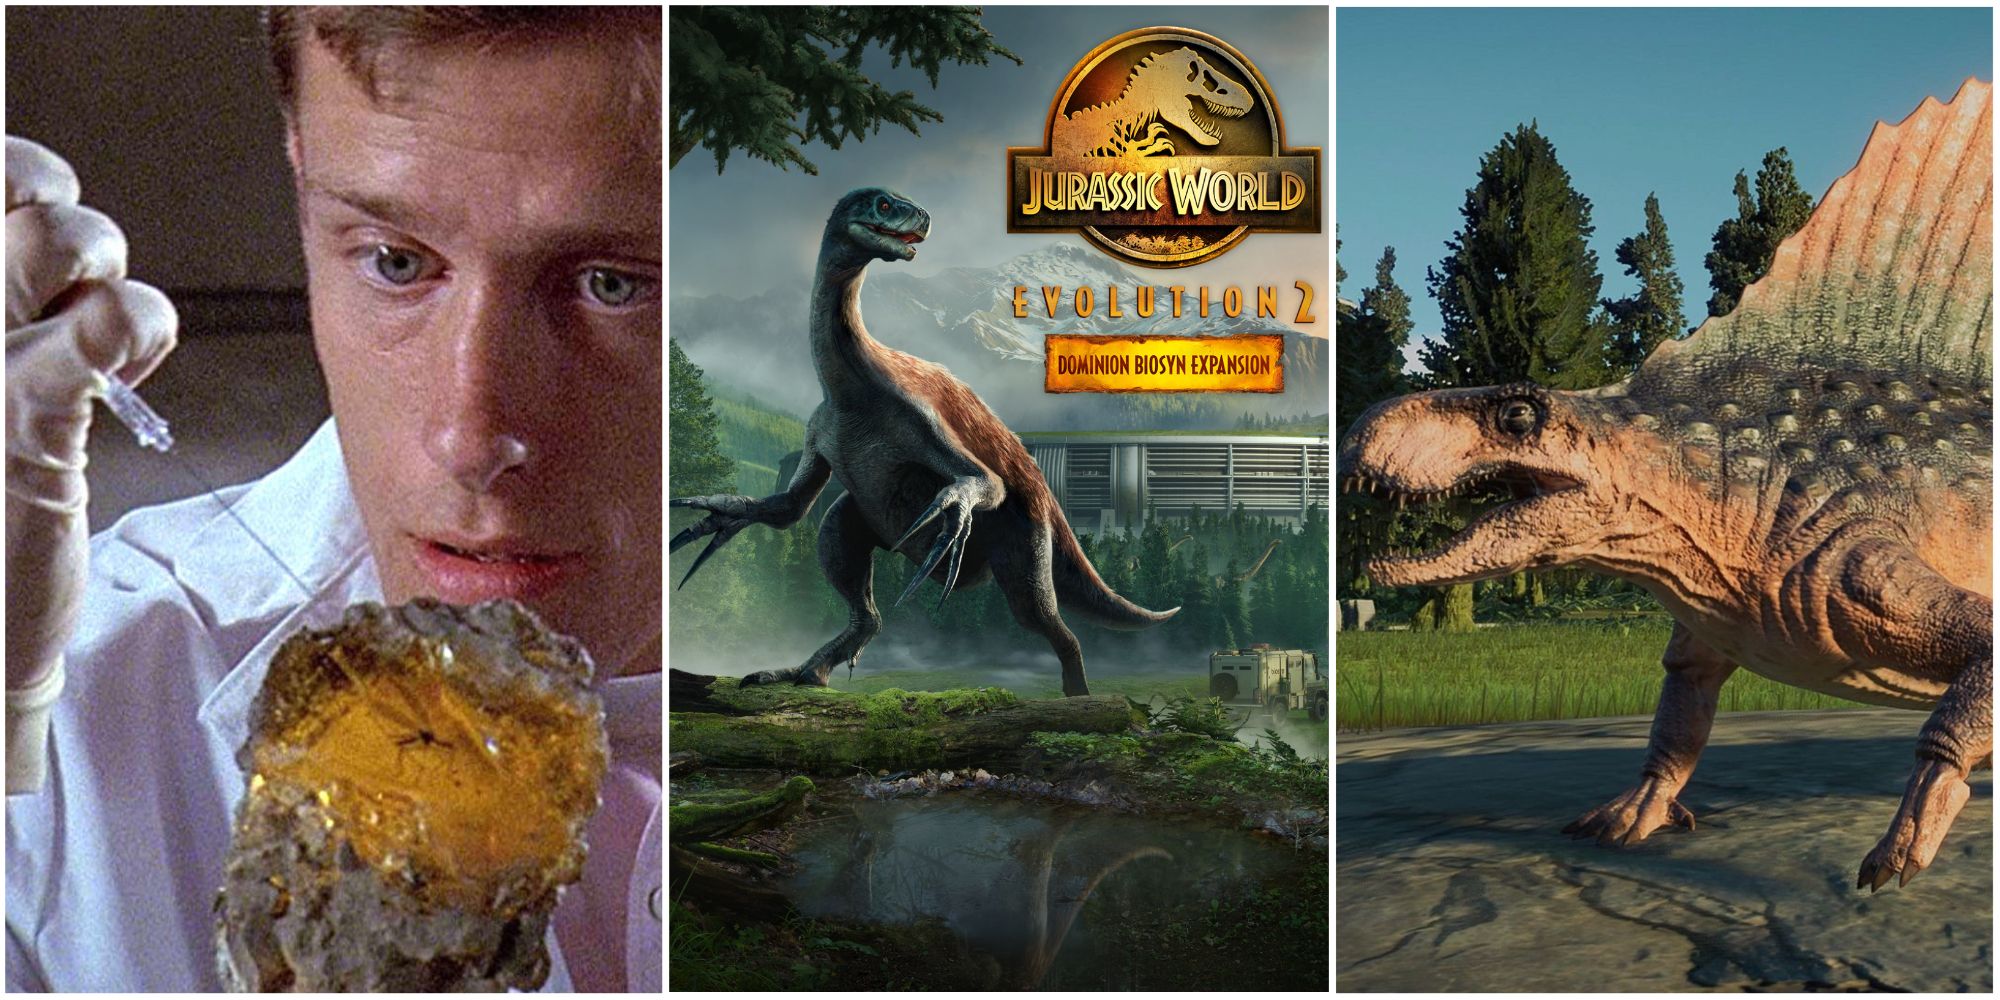 Things the Biosyn Expansion Adds to Jurassic World Evolution 2